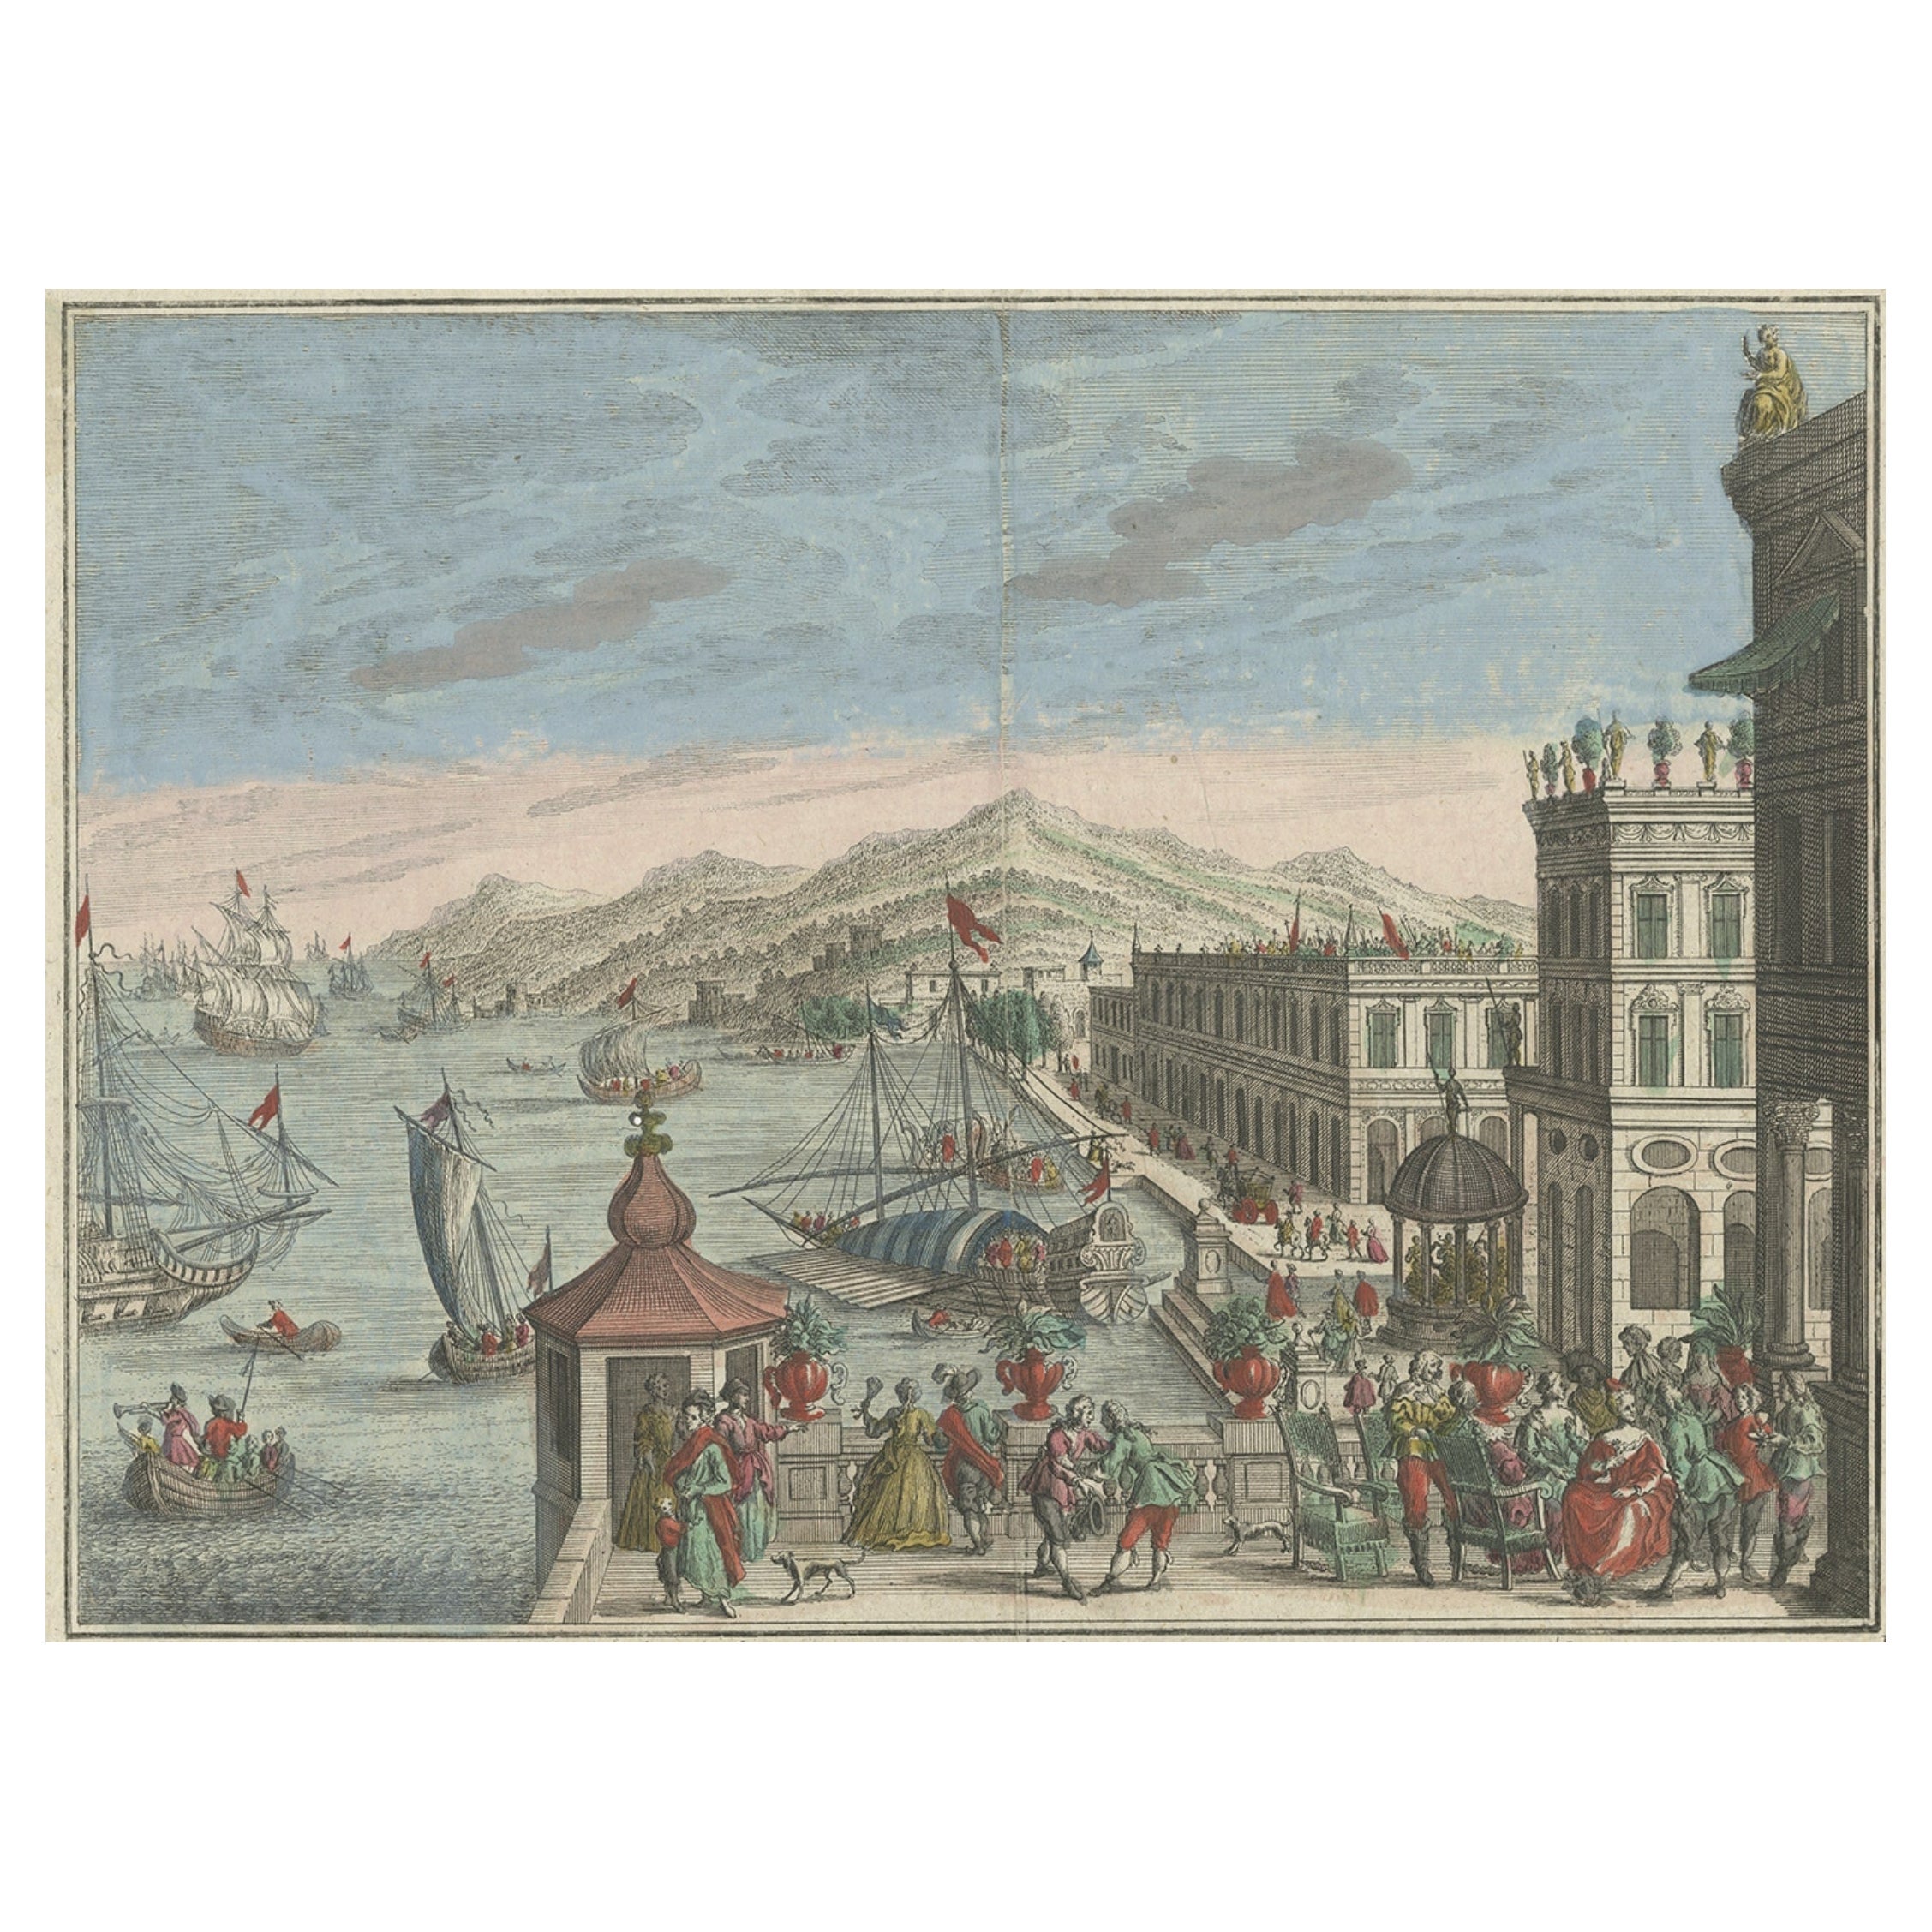 Decorative Handcolored Antique Print of an Outdoor Banquet Near a Port, c.1750 For Sale